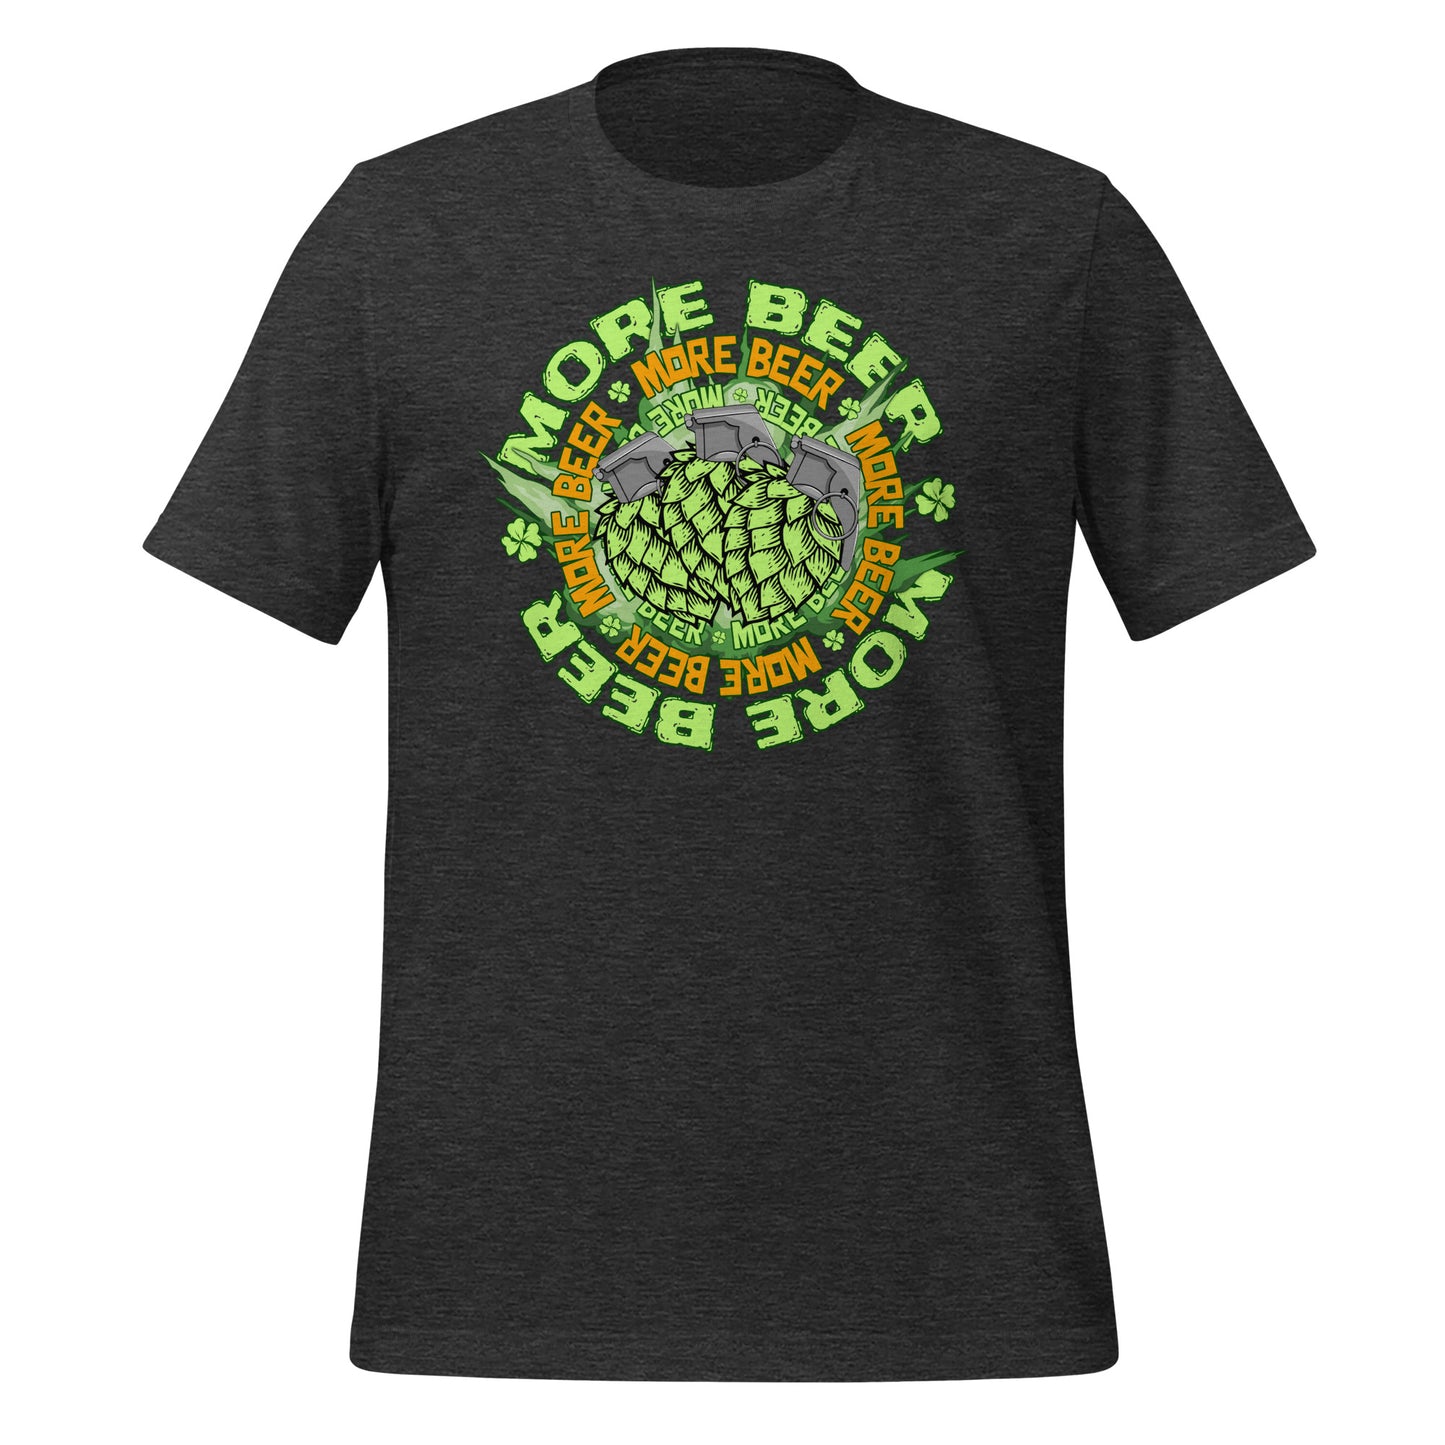 St-Patrick's-Day-More-Beer-graphic-t-shirt-dark-grey-arczeal-designs